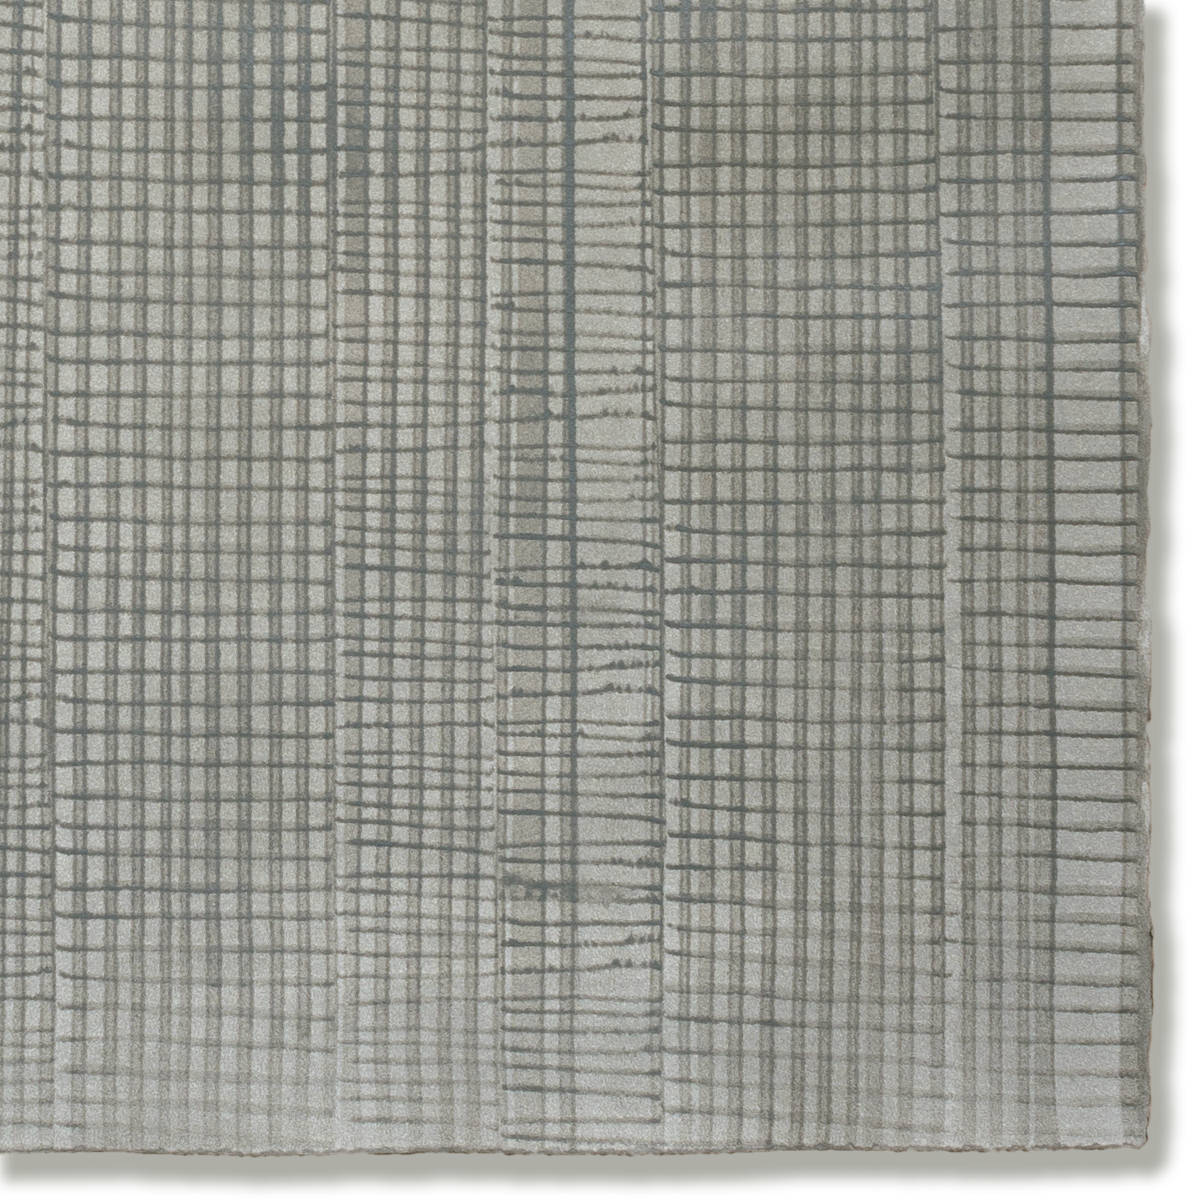 Detail of a hand-painted wallpaper swatch with an irregular grid pattern in charcoal on a gray field.